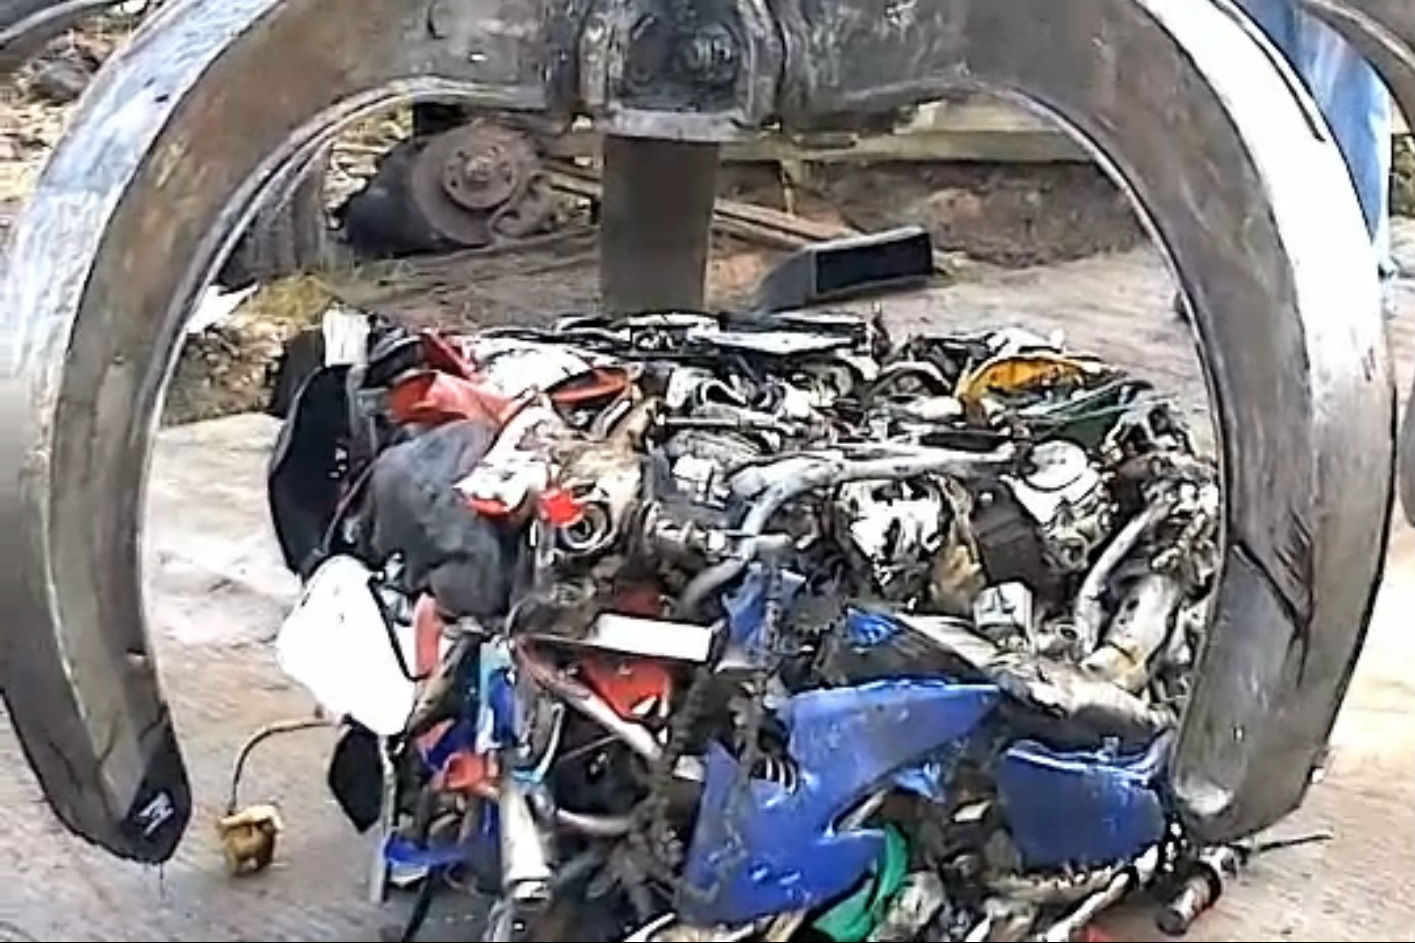 Council releases video of seized motorcycles being crushed